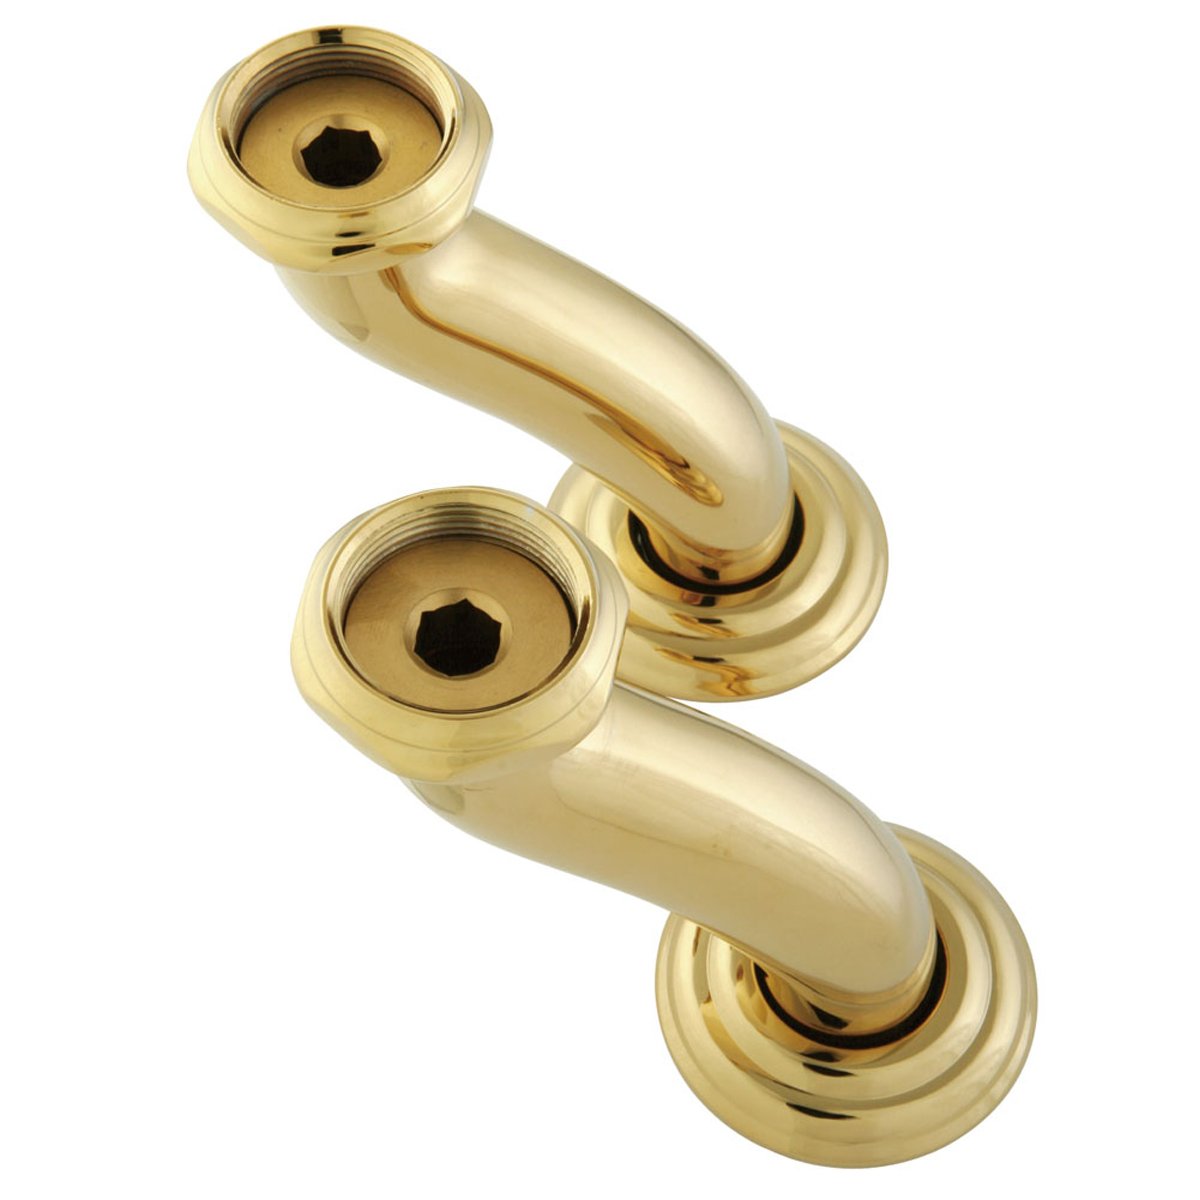 Kingston Brass Vintage S Shape Swing Arms for CC409T2 Series-Bathroom Accessories-Free Shipping-Directsinks.